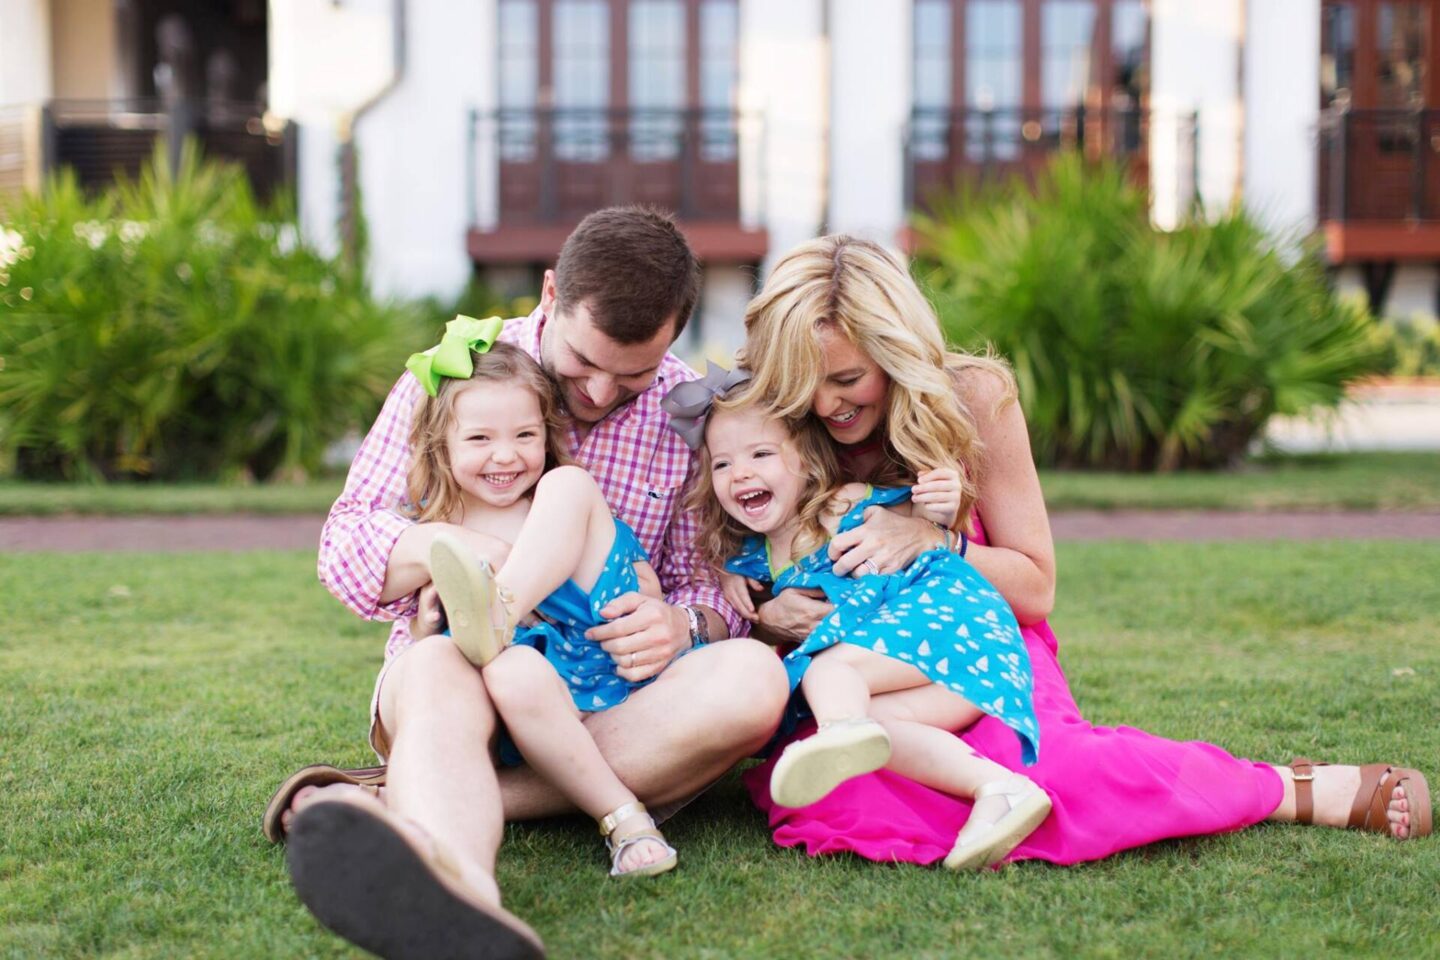 10 Year Wedding Anniversary by popular Nashville lifestyle blog, Hello Happiness: image of a mom and dad sitting on the grass with their two young daughters. 